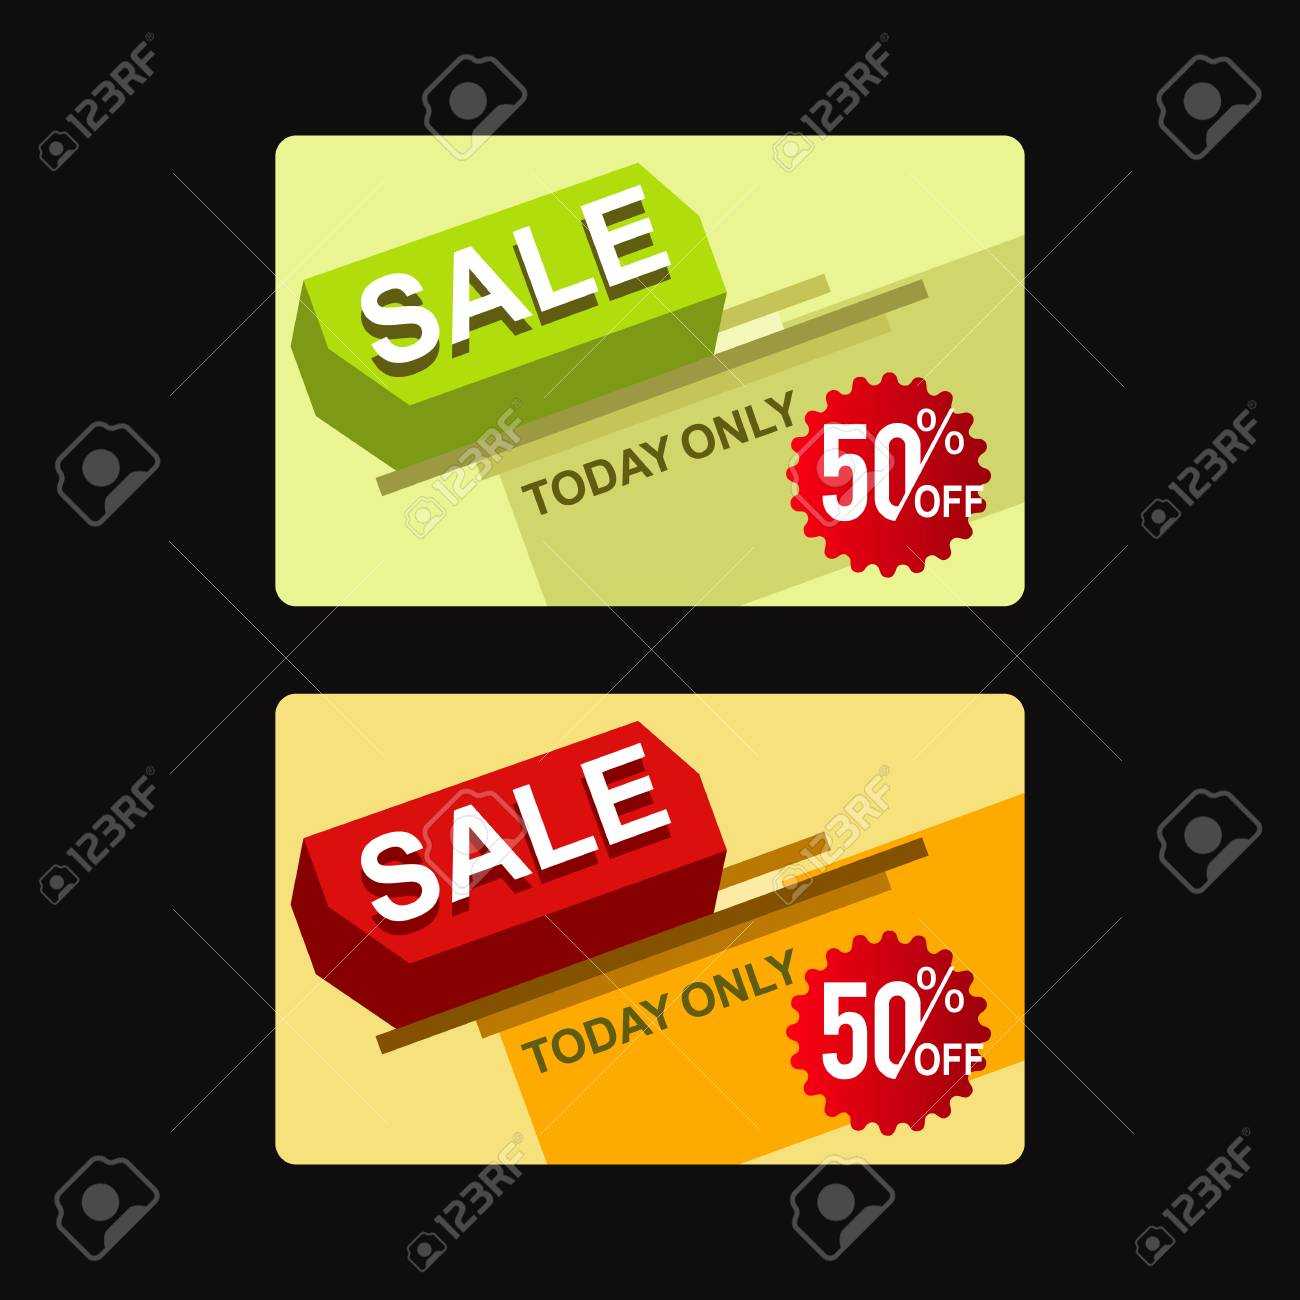 Credit Card Templates For Sale - Zohre.horizonconsulting.co Throughout Credit Card Templates For Sale